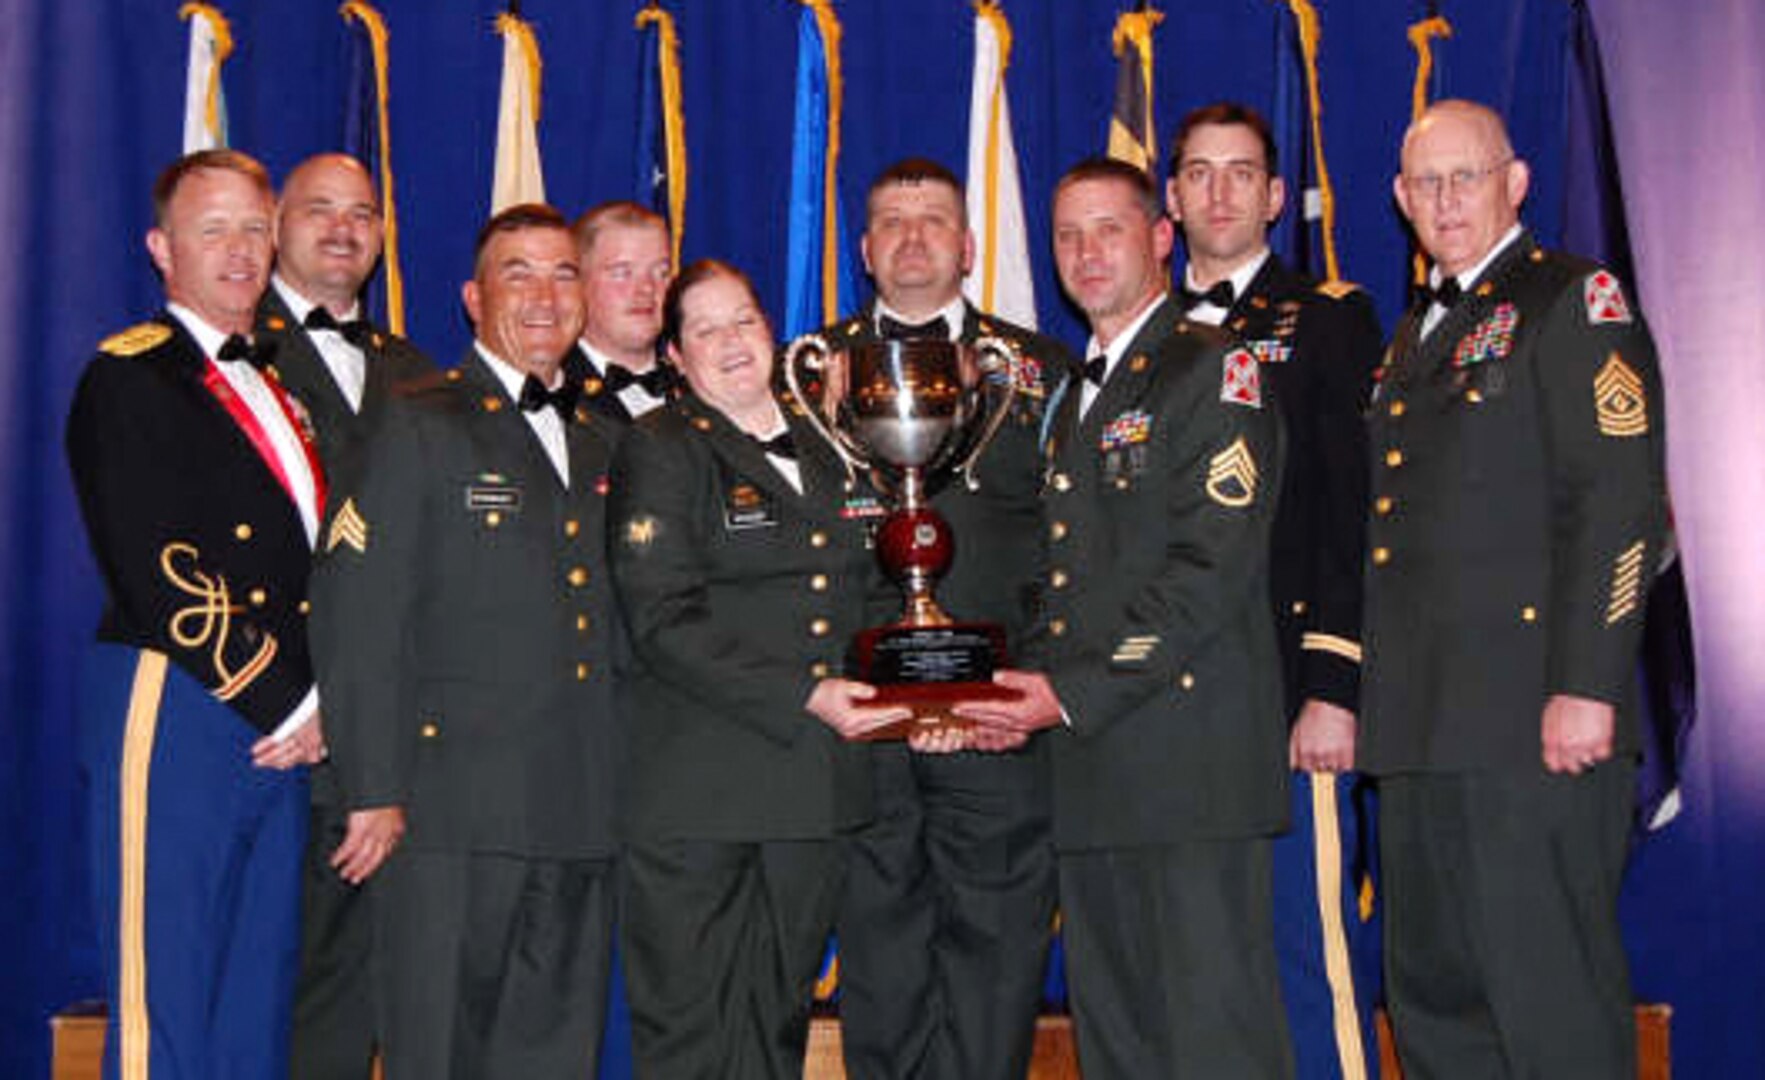 Members of the Virginia National Guard pose with the 2008 Connelly Award April 2 in Atlanta. The 1032nd Transportation Company was awarded the Connelly Award for excellence in Army Food Service in the National Guard Field Kitchen Category for 2008. Members of the unit who attended the awards ceremony include: 1st Sgt. E. Tim Miller - Staff Sgt. Allen Osburn, Staff Sgt. Ralph Norris, Sgt. Vincent Woodmancy, Sgt. Paul Woodmancy, Spc. Julie Woodby, Spc. Gary Martin, Spc. Brandon Sexton and Spc. Billy Rose.